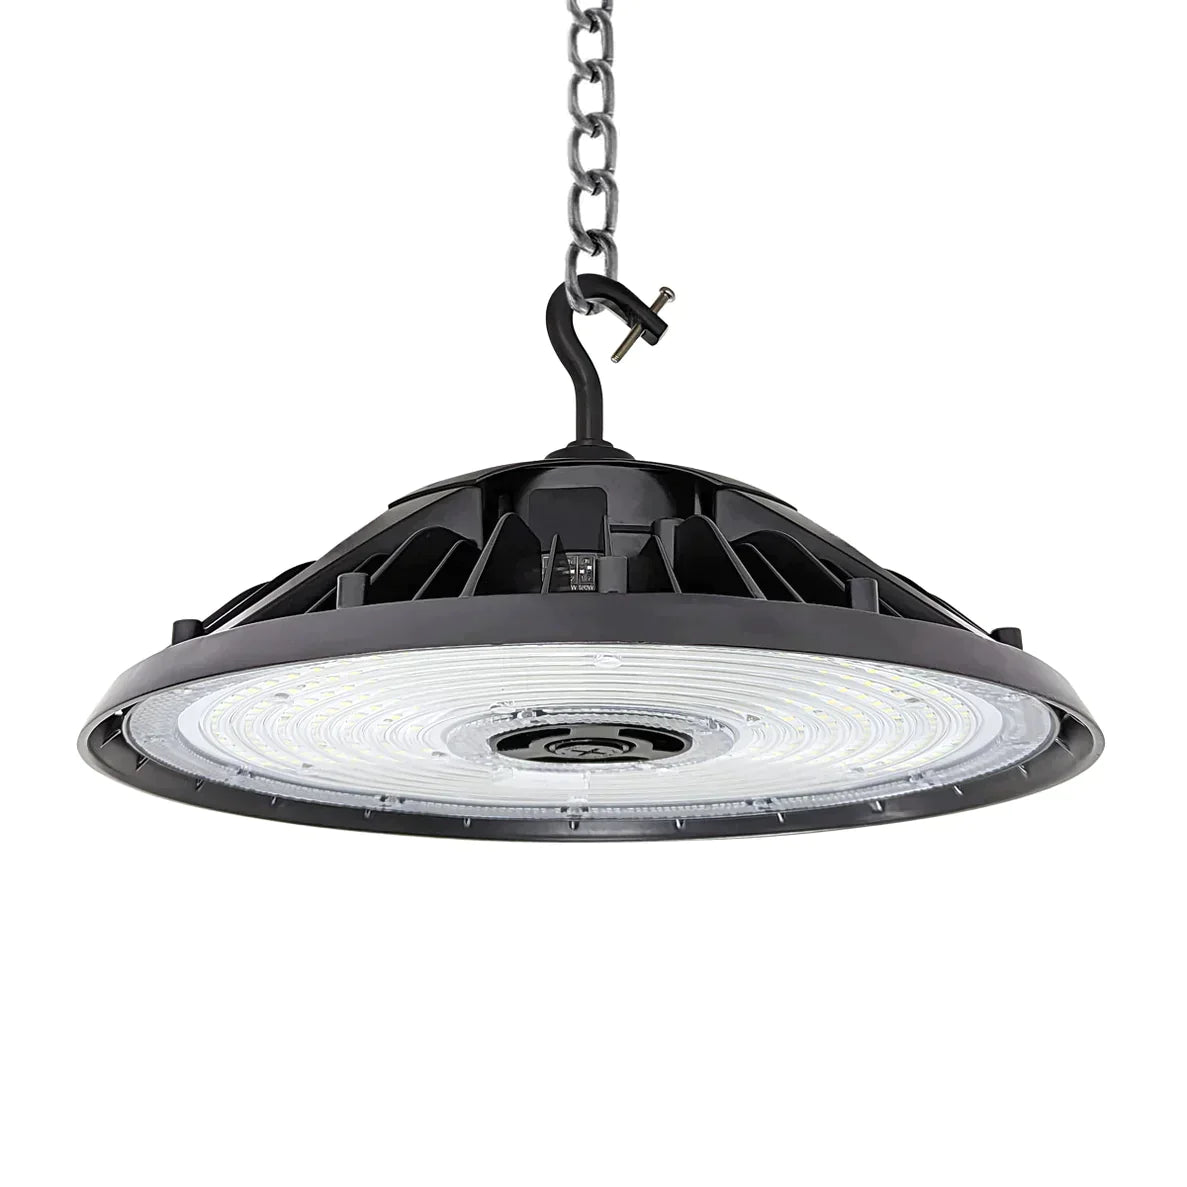 RHB04-240W Selectable UFO LED High Bay - Up to 36,300 Lumens